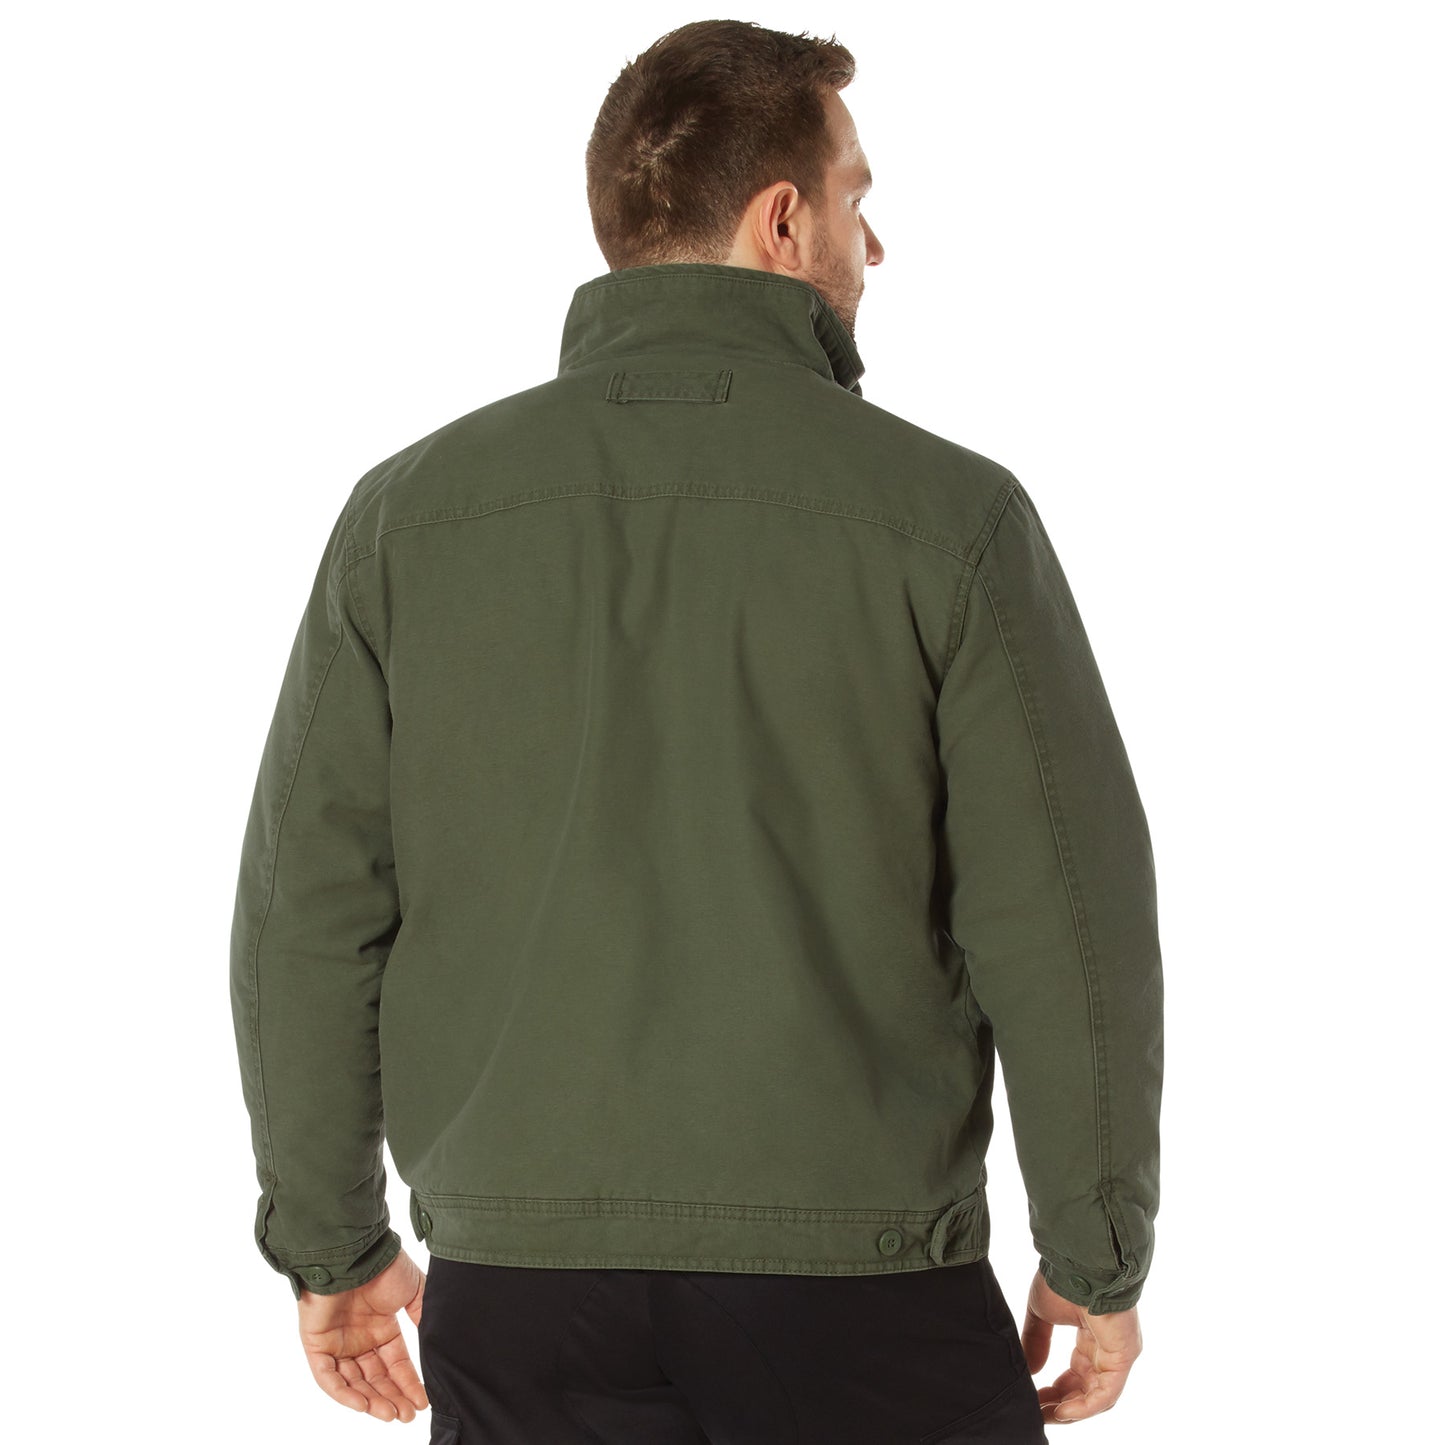 Rothco Concealed Carry 3 Season Jacket - Olive Drab